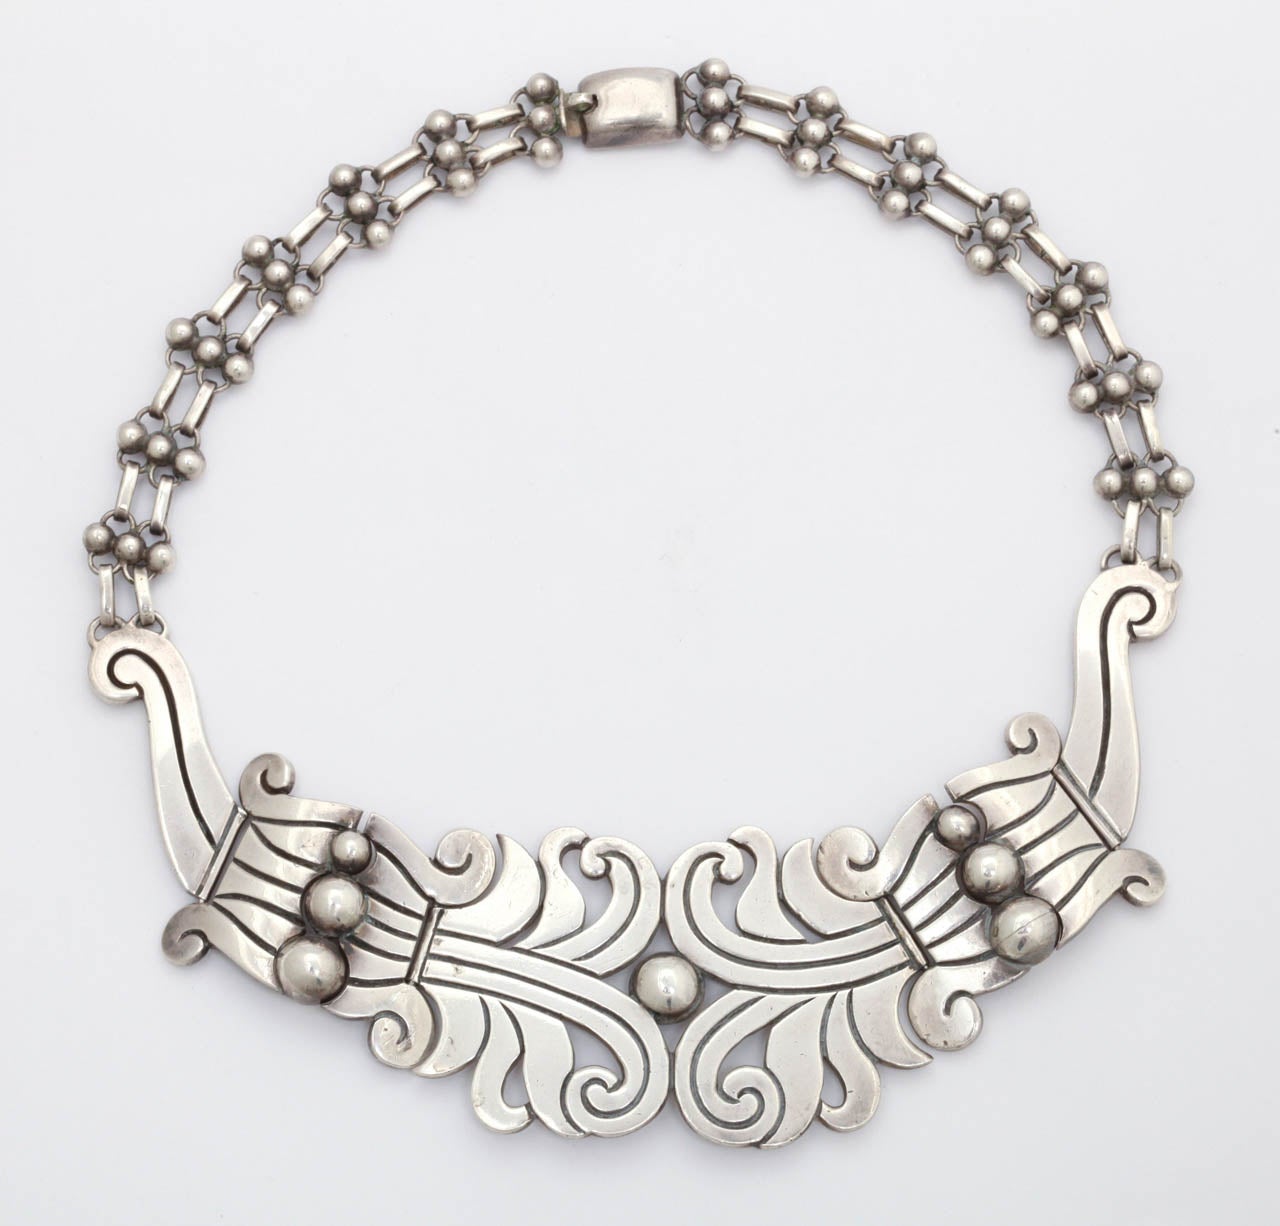 A necklace of forceful presence by master silversmith Hector Aguilar, one of the famous and finest Mexican jewelry designers of the 1940's. Aguilar is a success story. He was made manager of William Spratling's original shop Taller de Delicias in